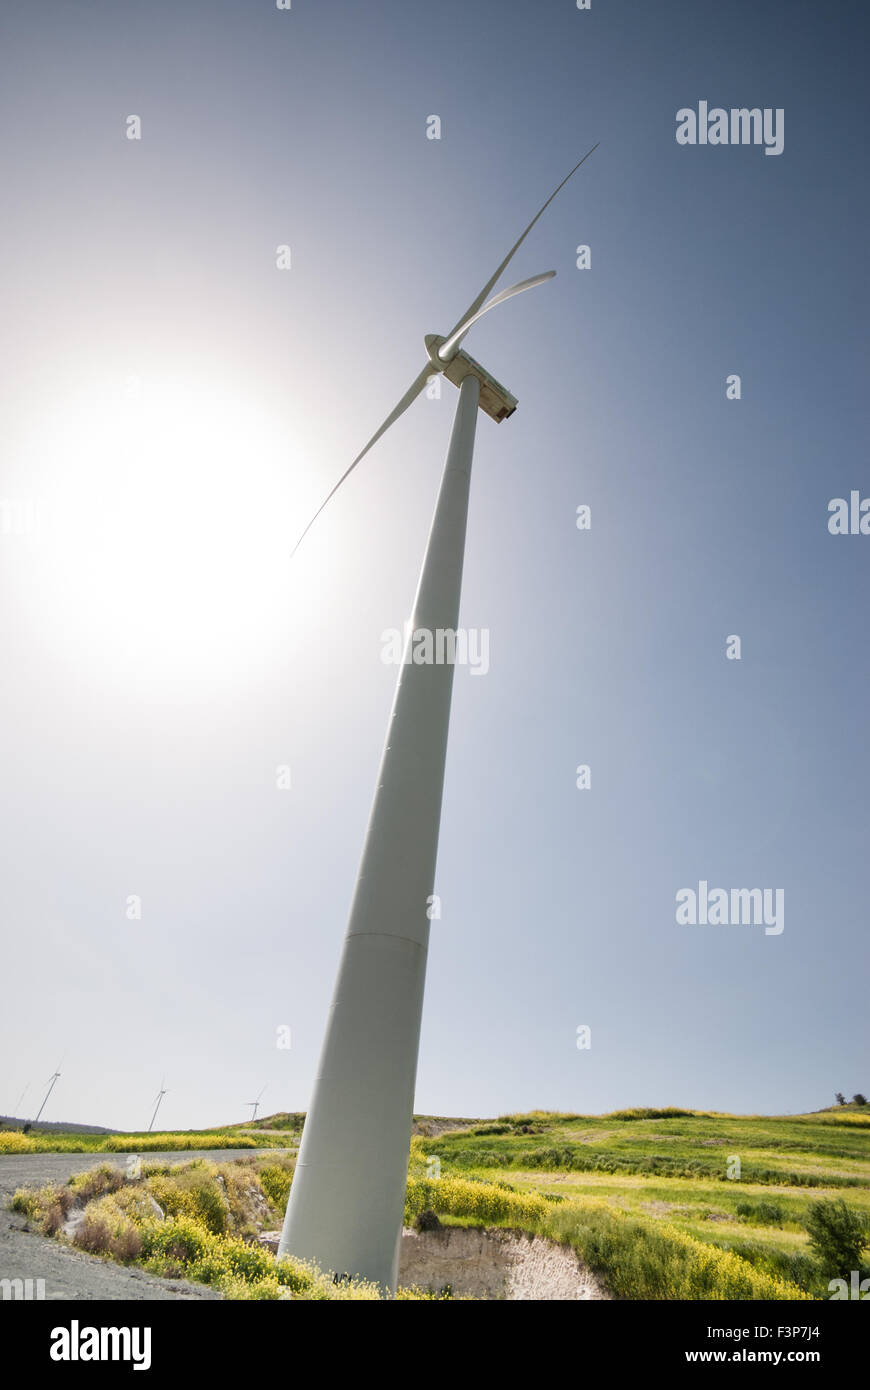 Wind mill  power turbine  generators against the sun  generating electricity from wind.  Concept of renewable energy sources. Stock Photo